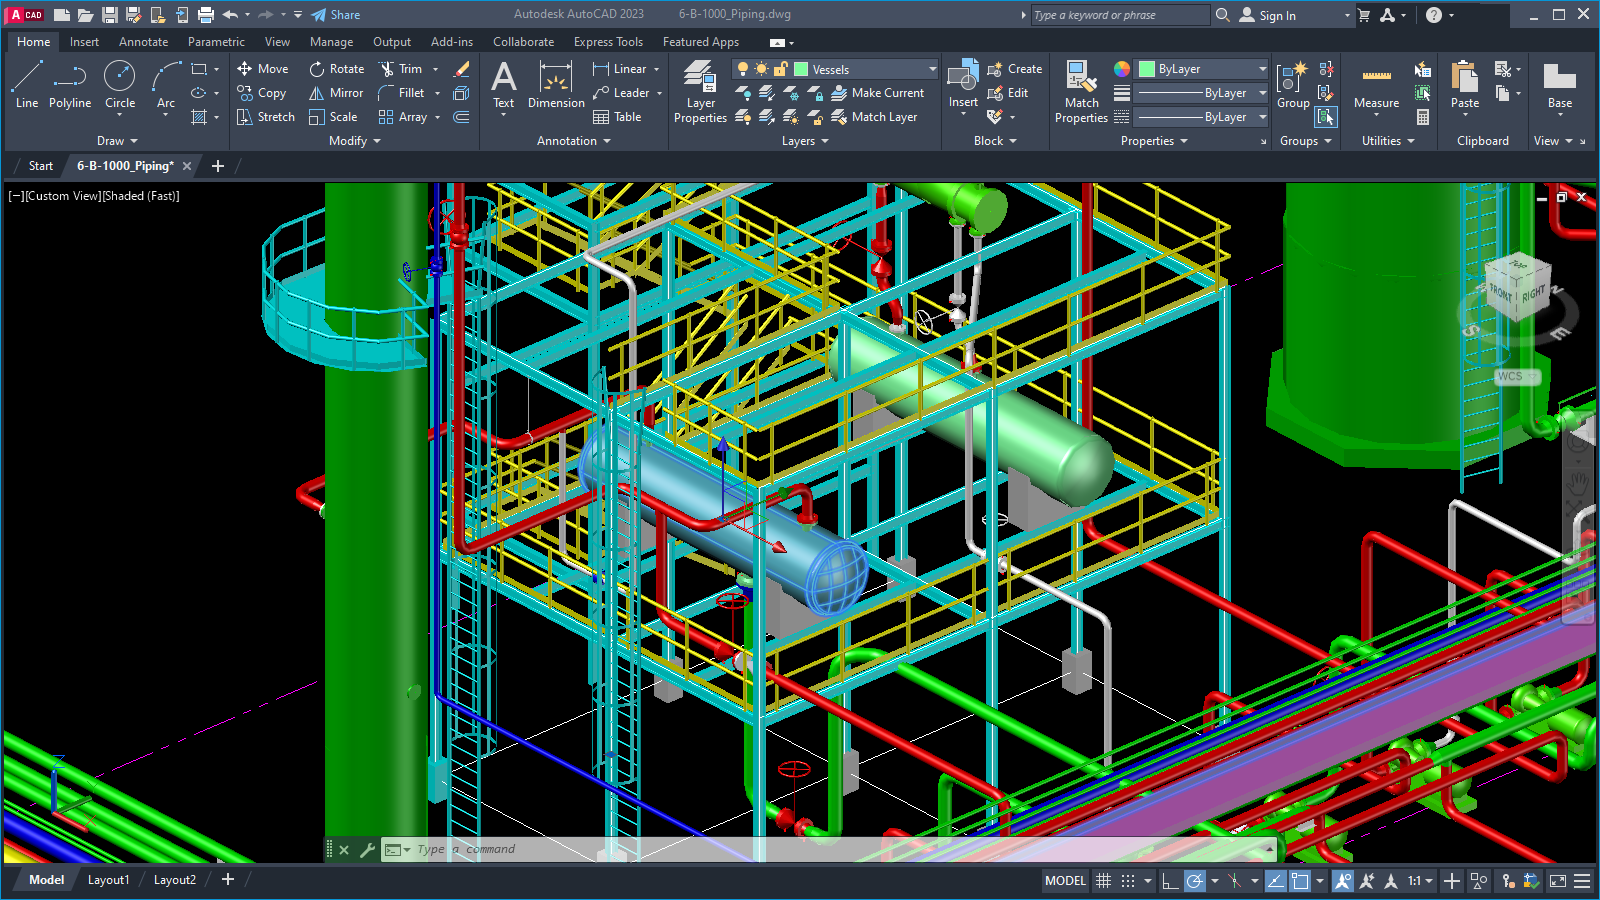 What's New in AutoCAD Architecture 2023 Toolset